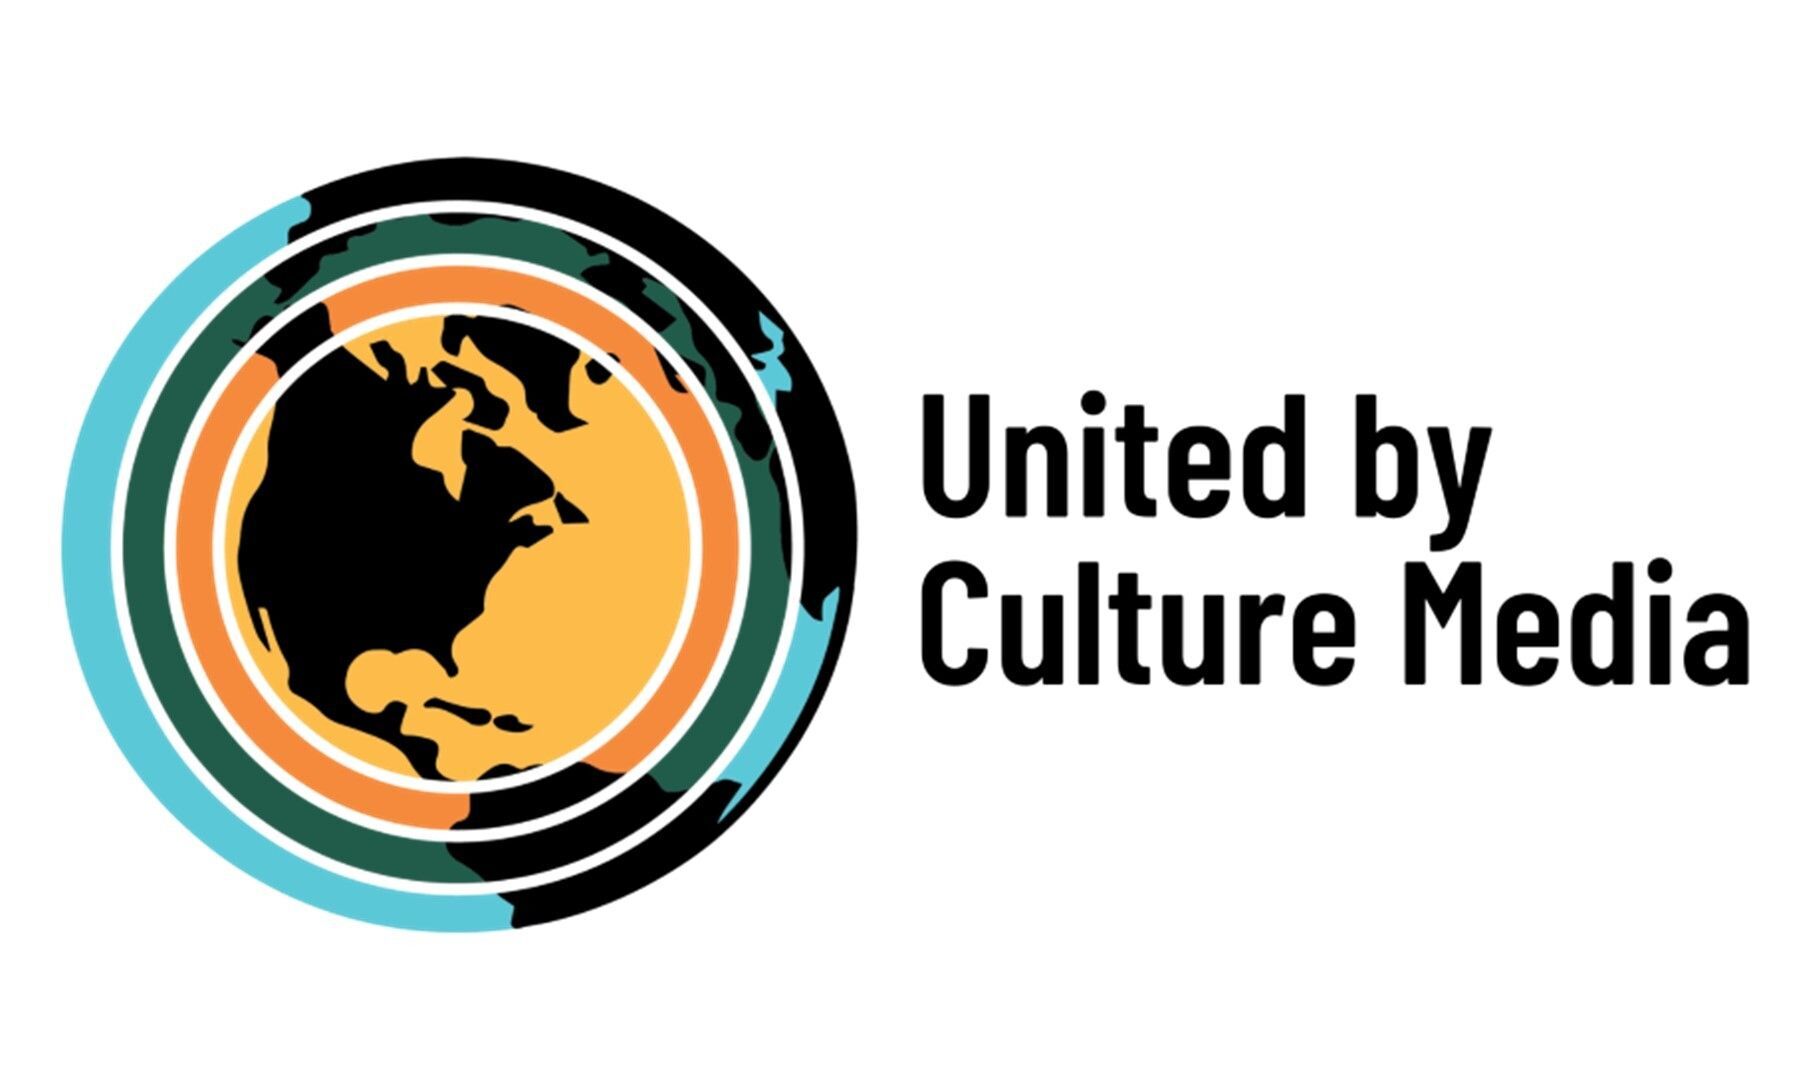 United by Culture Media